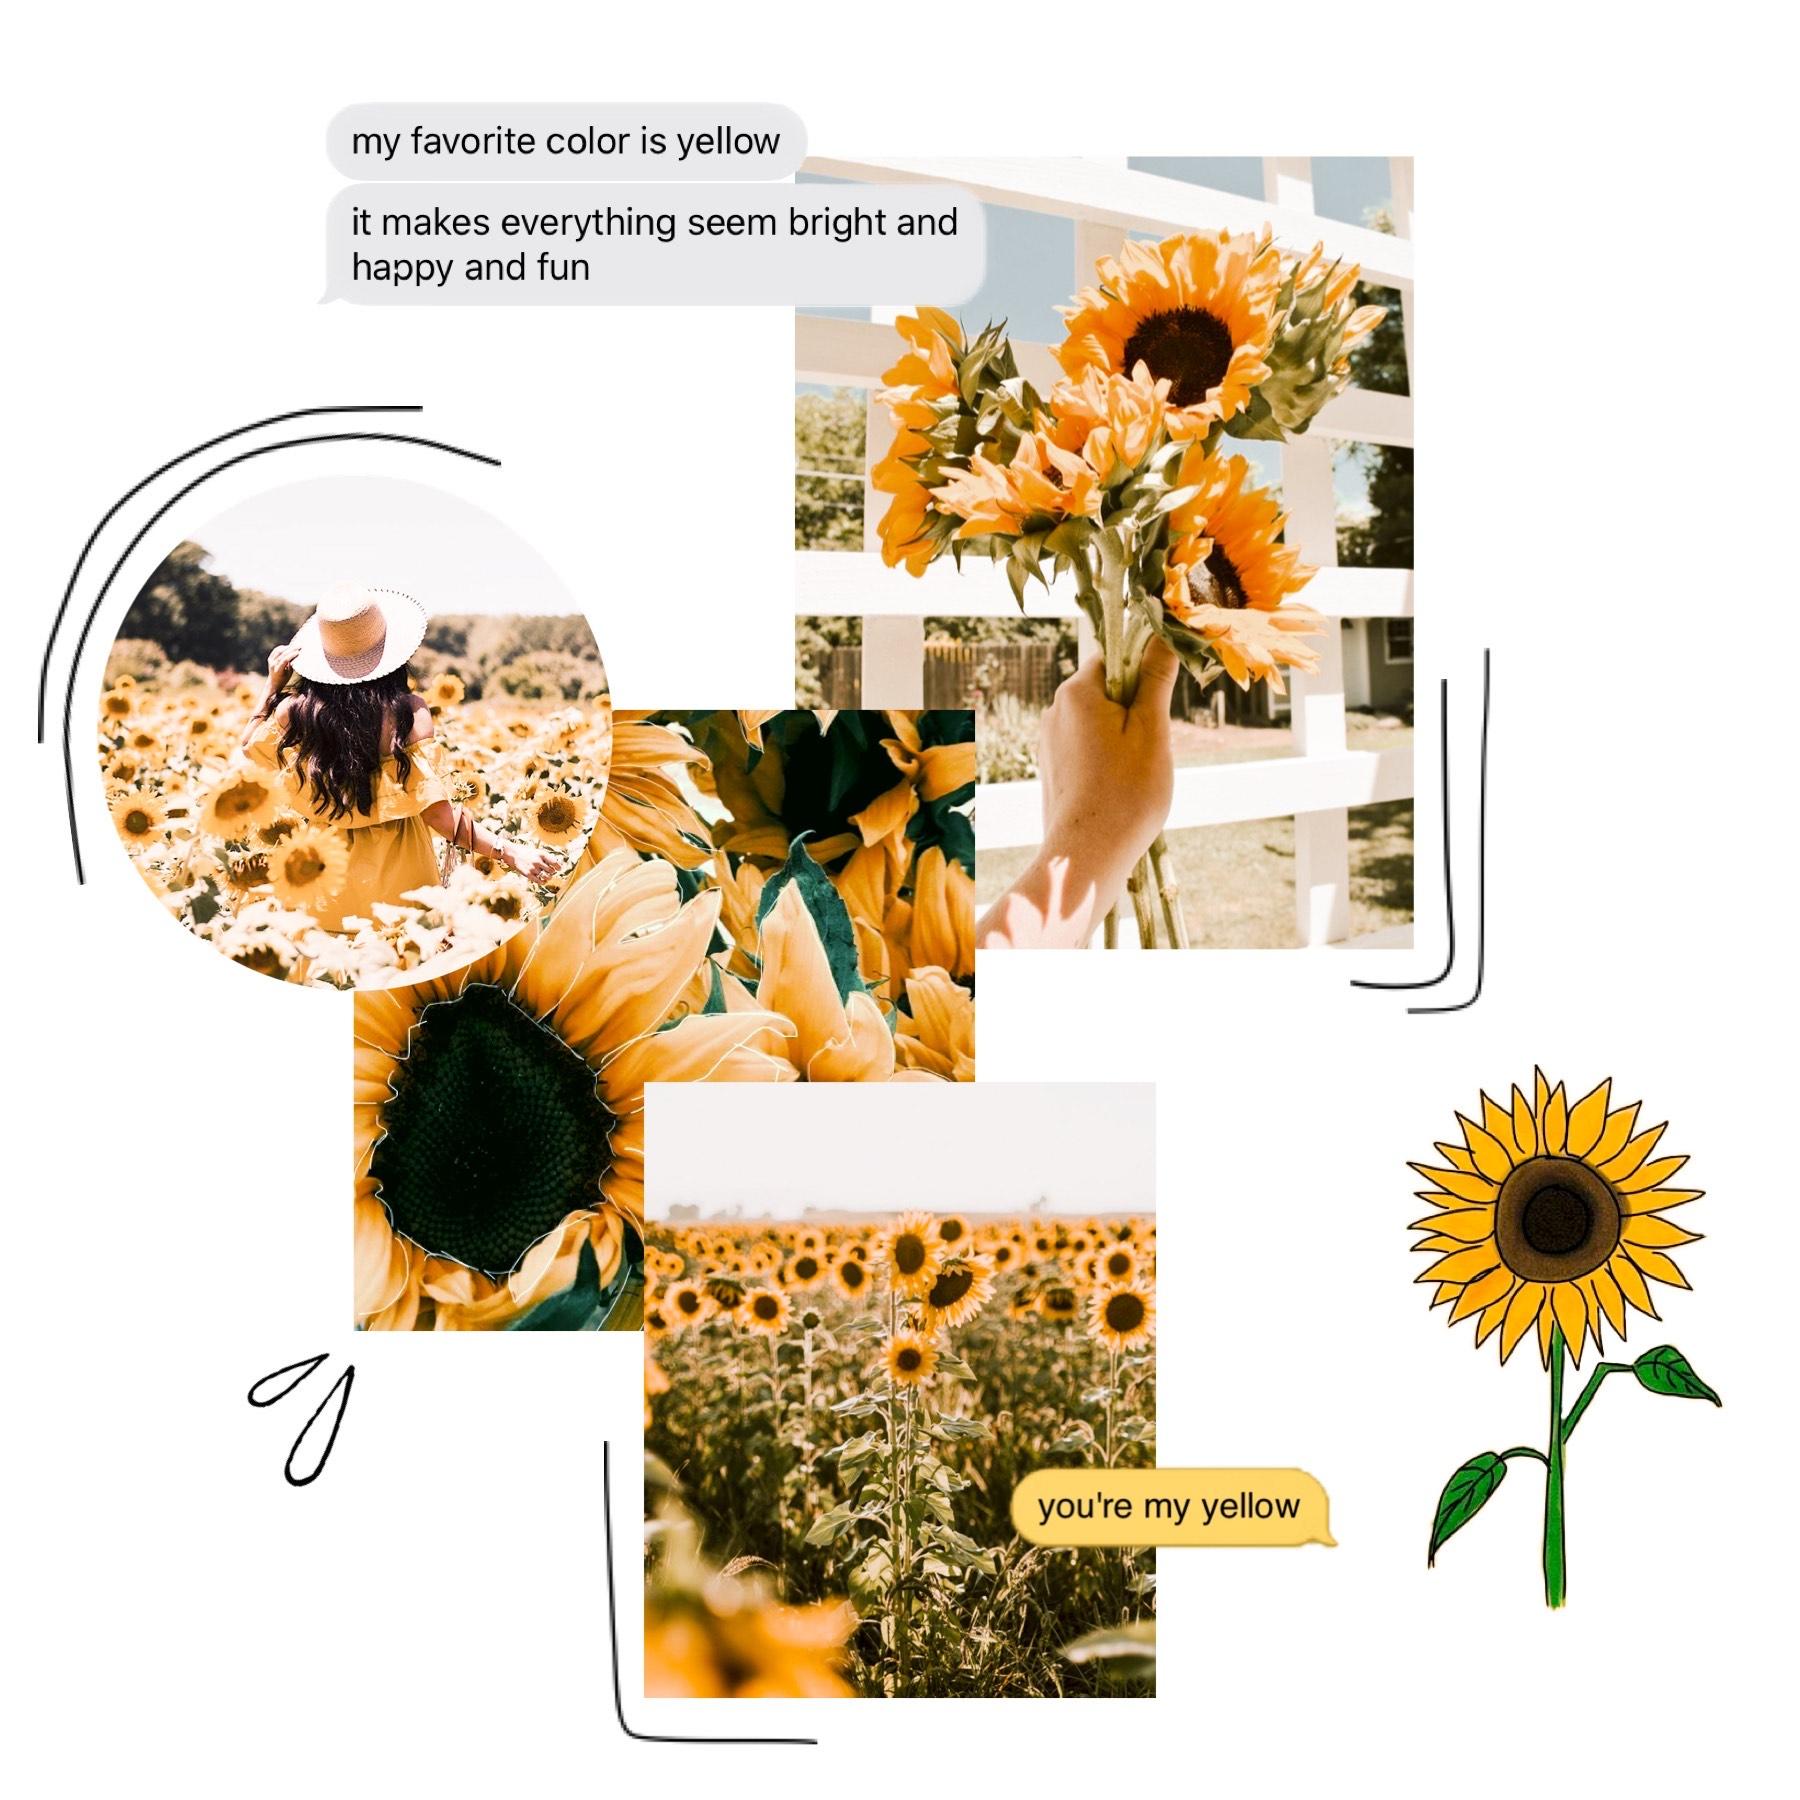 i’ve just been really feeling sunflowers lately and idk why 🌻✨ so grateful for the 3 day weekend, i needed it lol 😂 how are you all?
QOTD: what are you doing this weekend?
AOTD in comments :)
